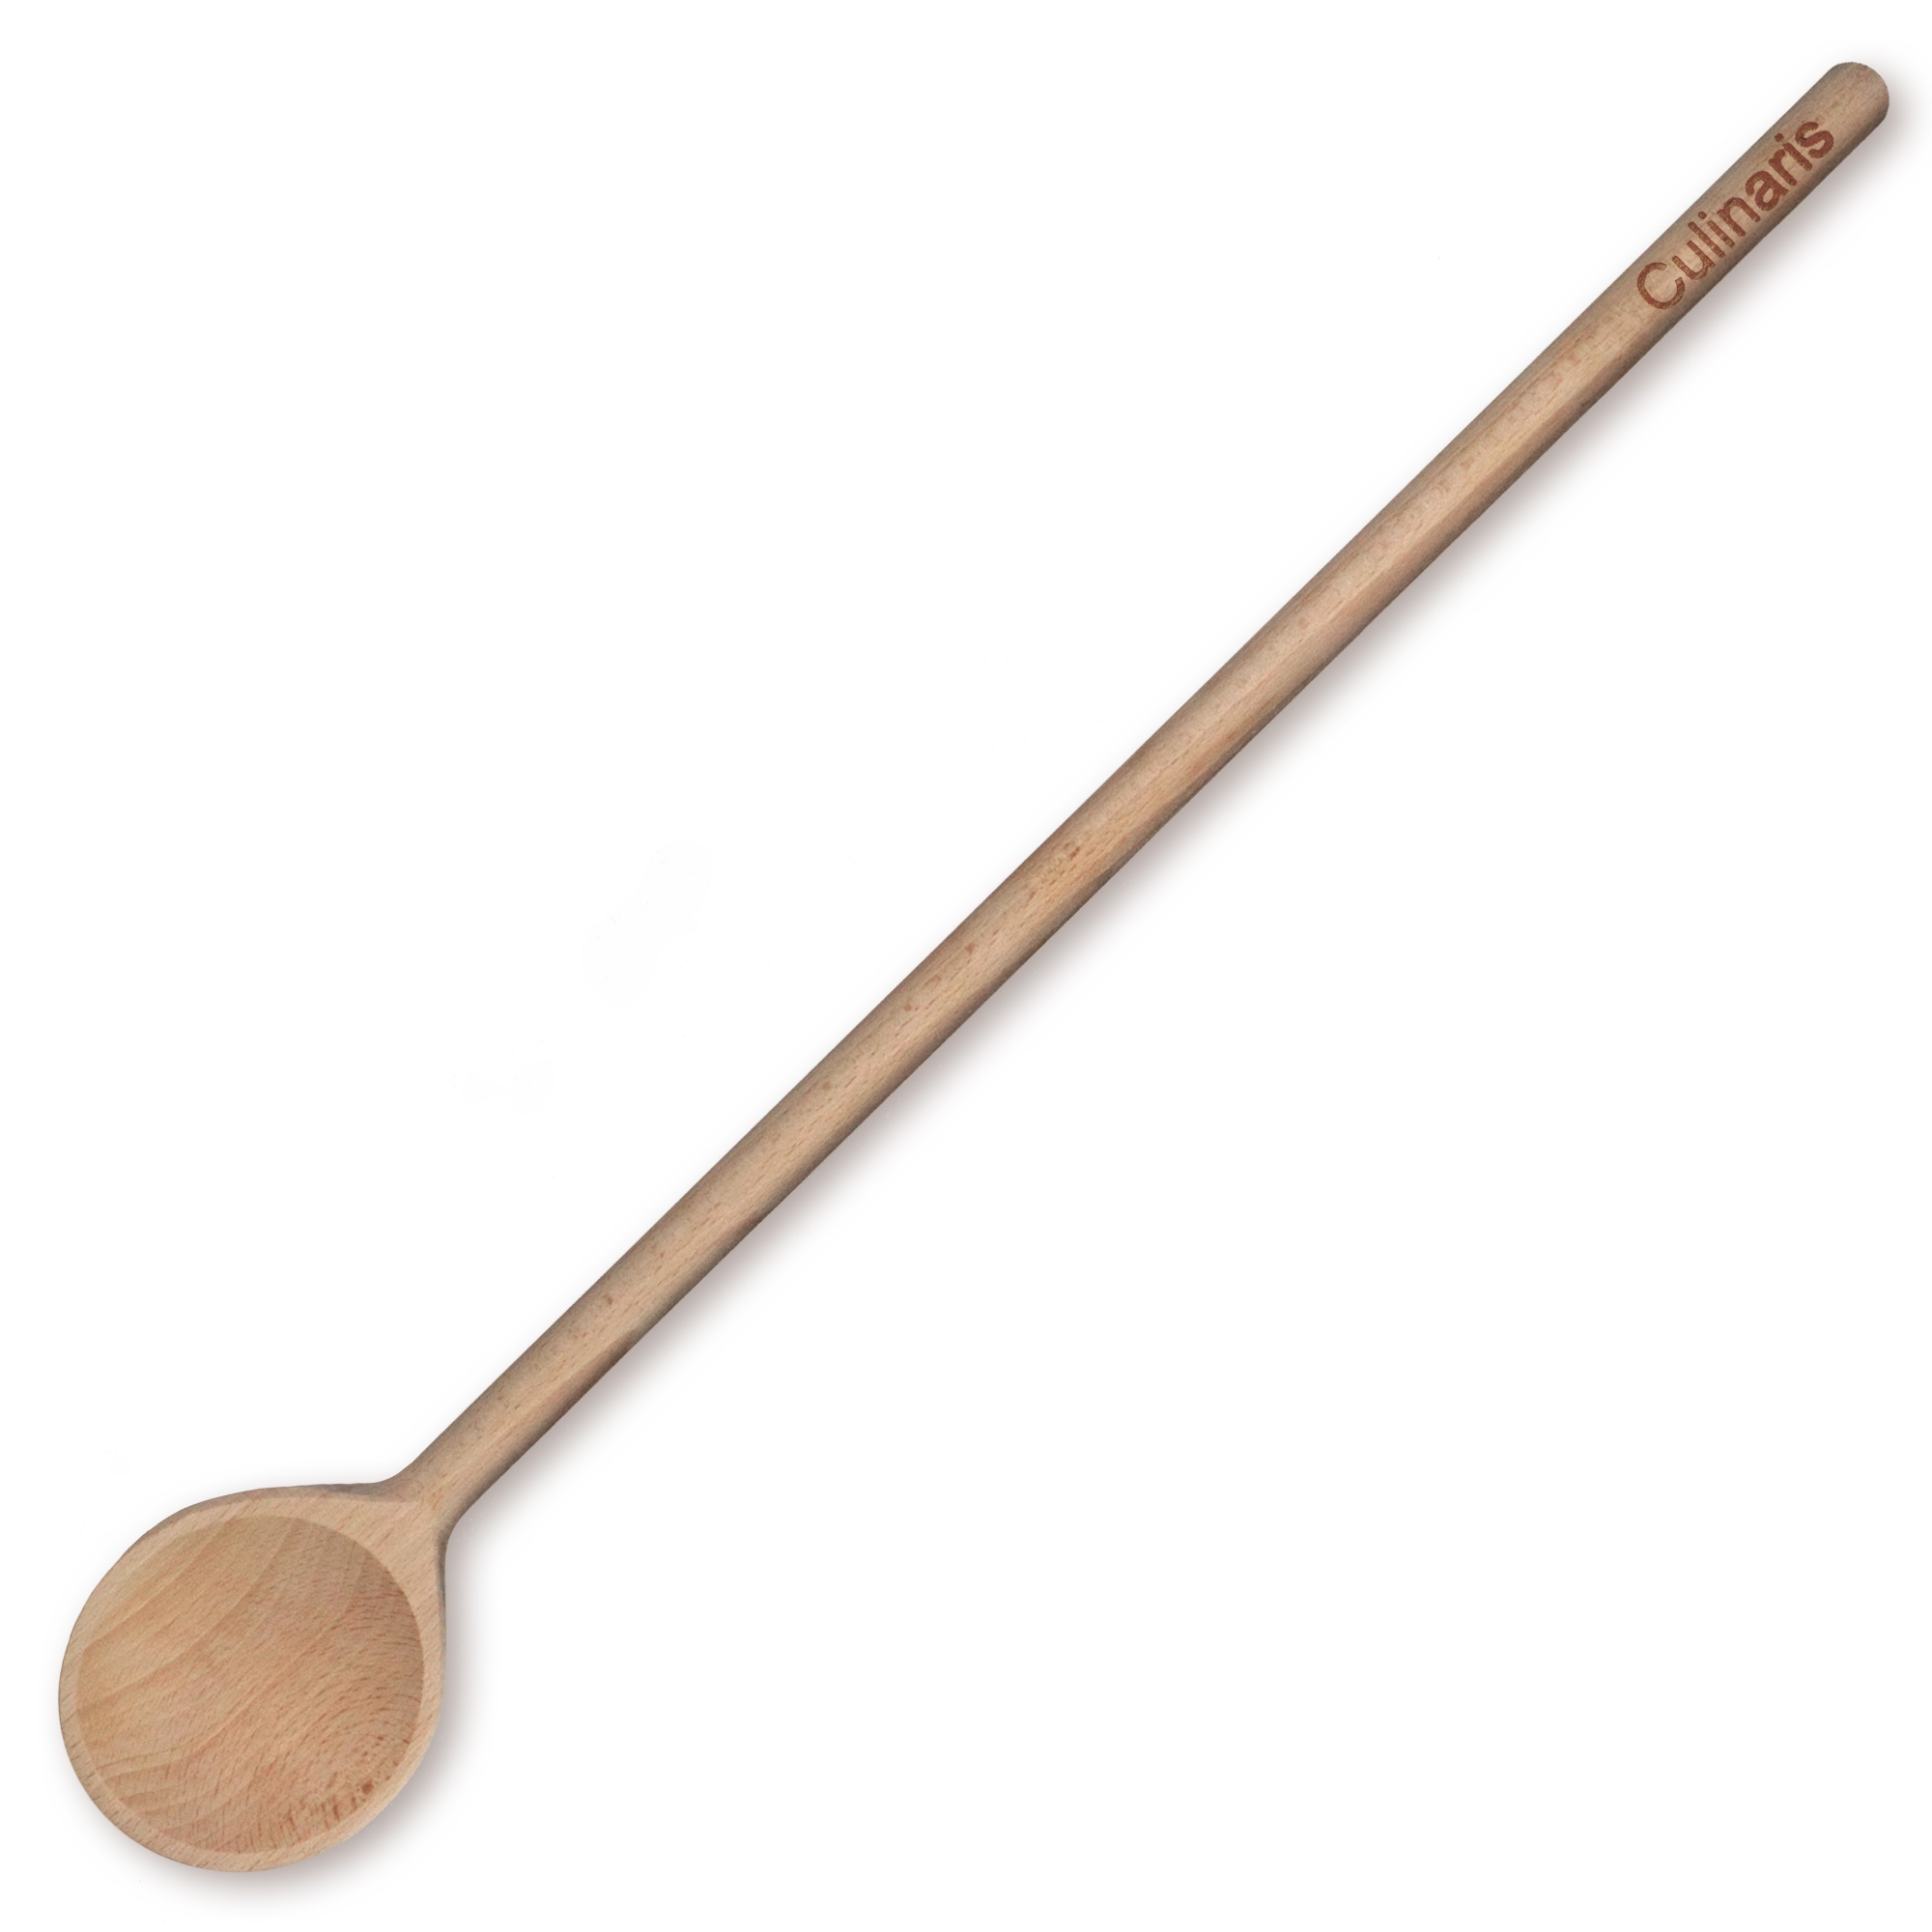 Culinaris - commercial kitchen spoon made of beech wood 70cm